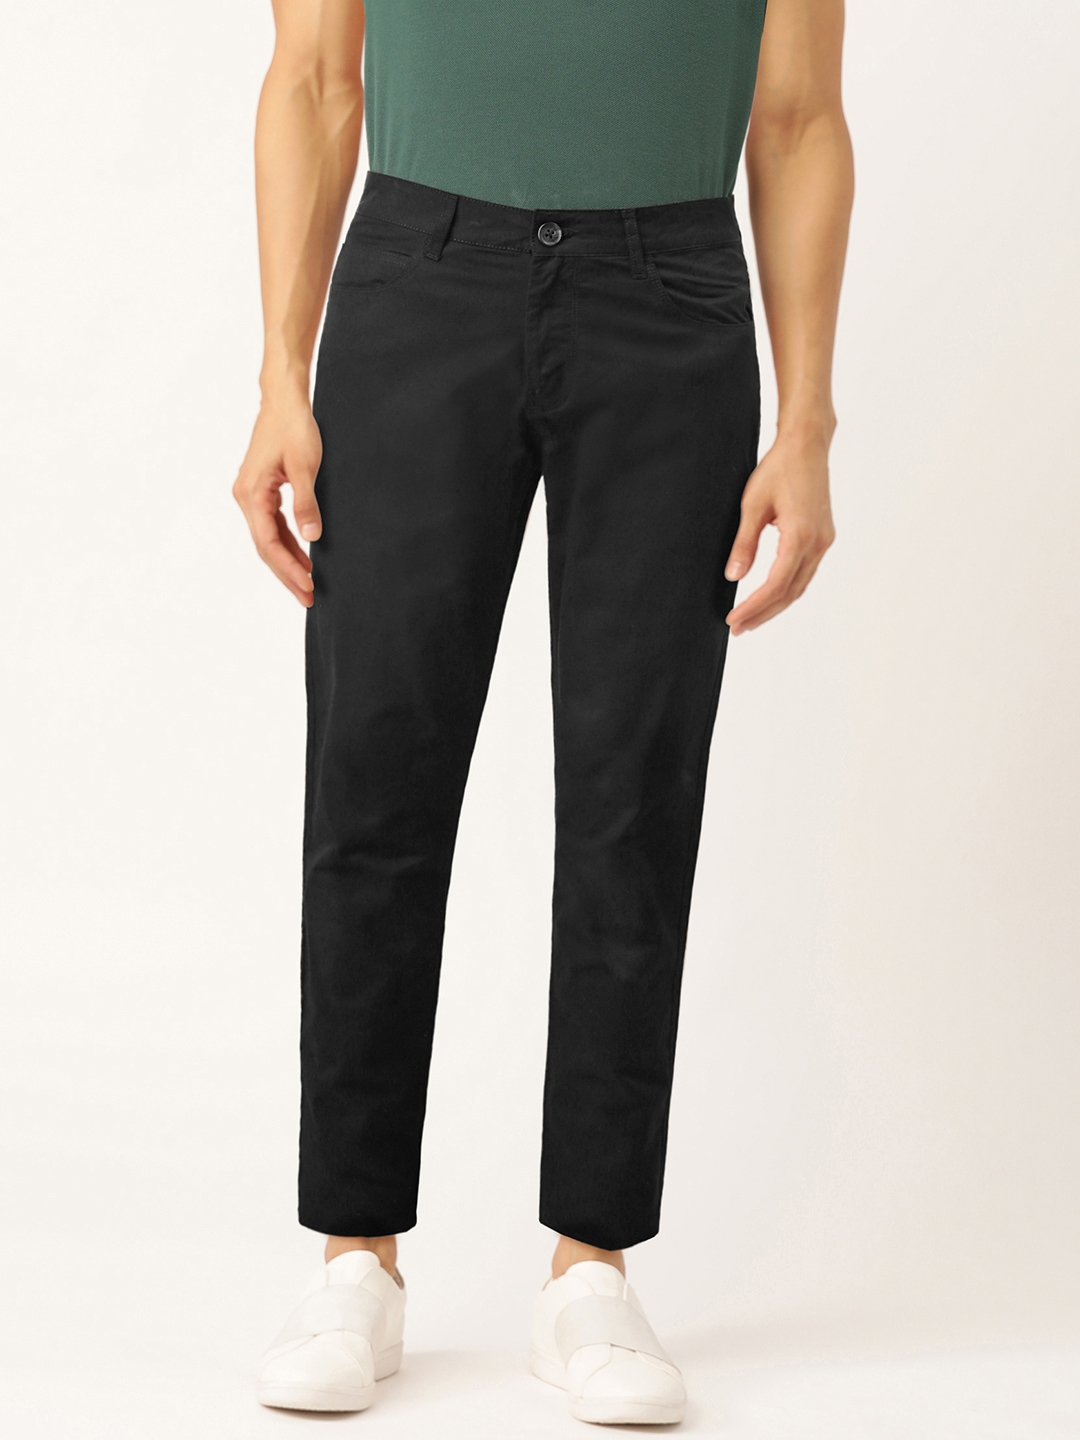 United Colors of Benetton Men Black Slim Fit Solid Chinos